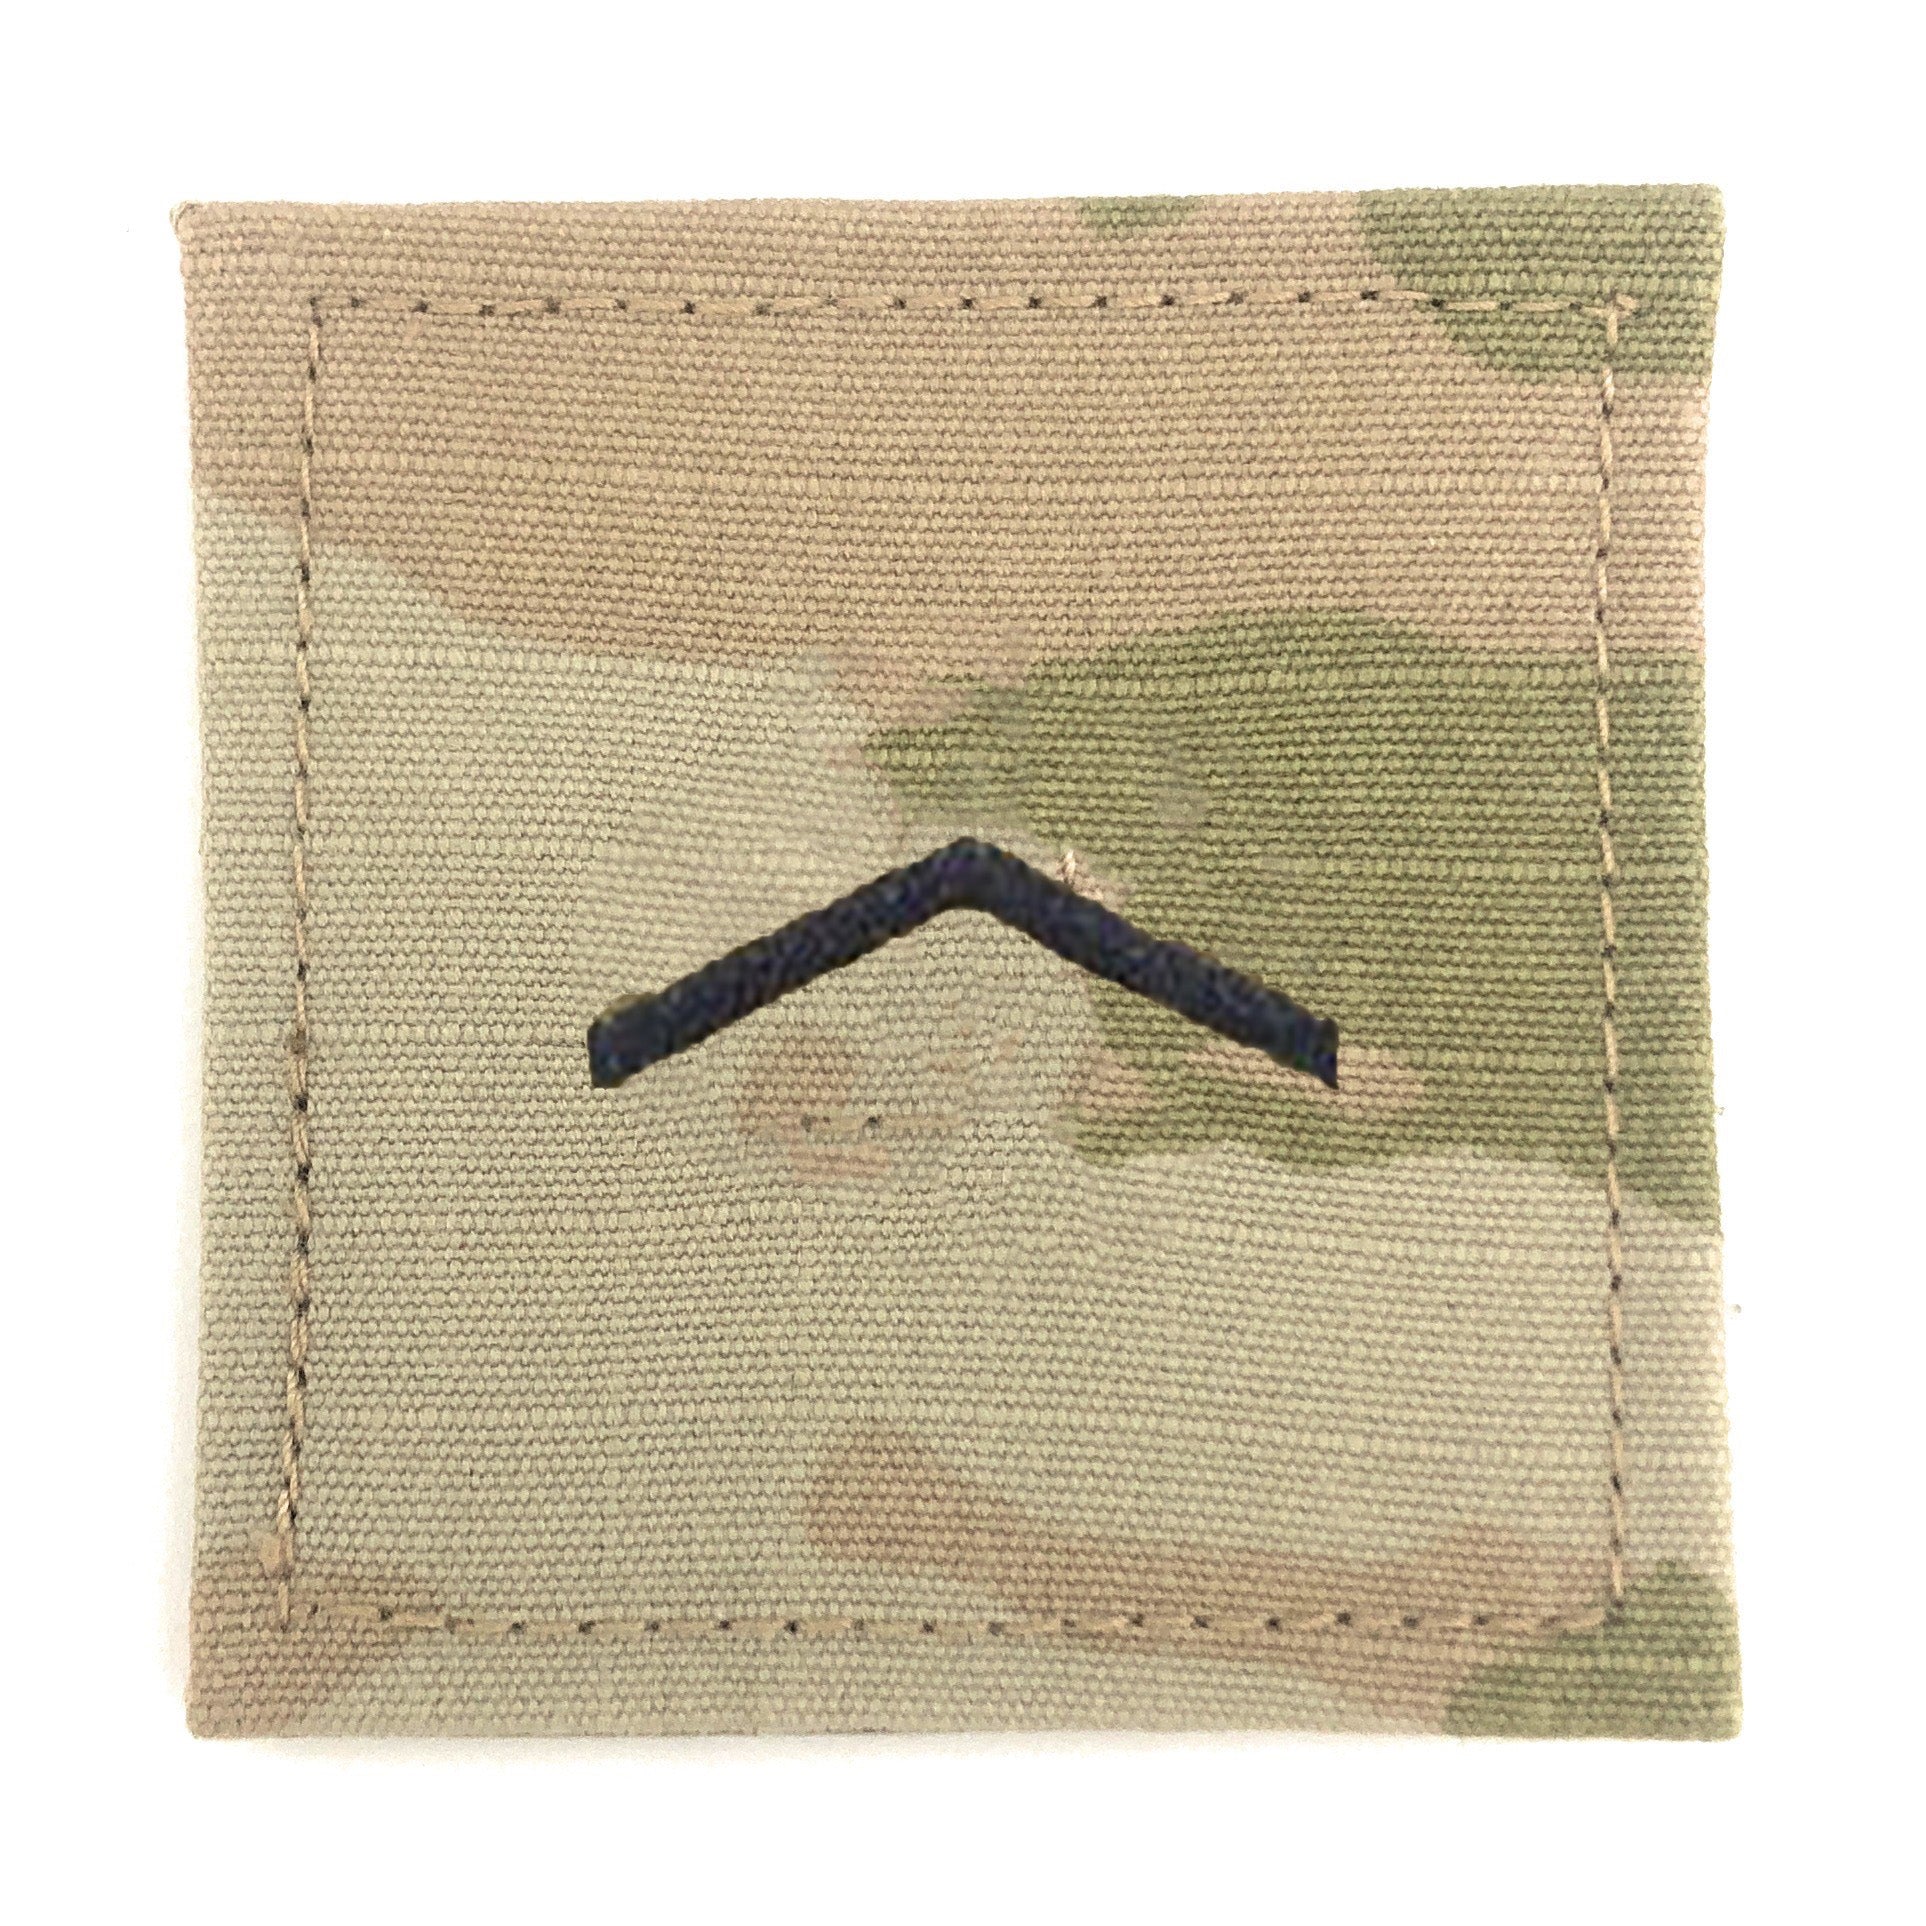 E2 ROTC Private OCP Rank with Hook Fastener | Insignia Depot